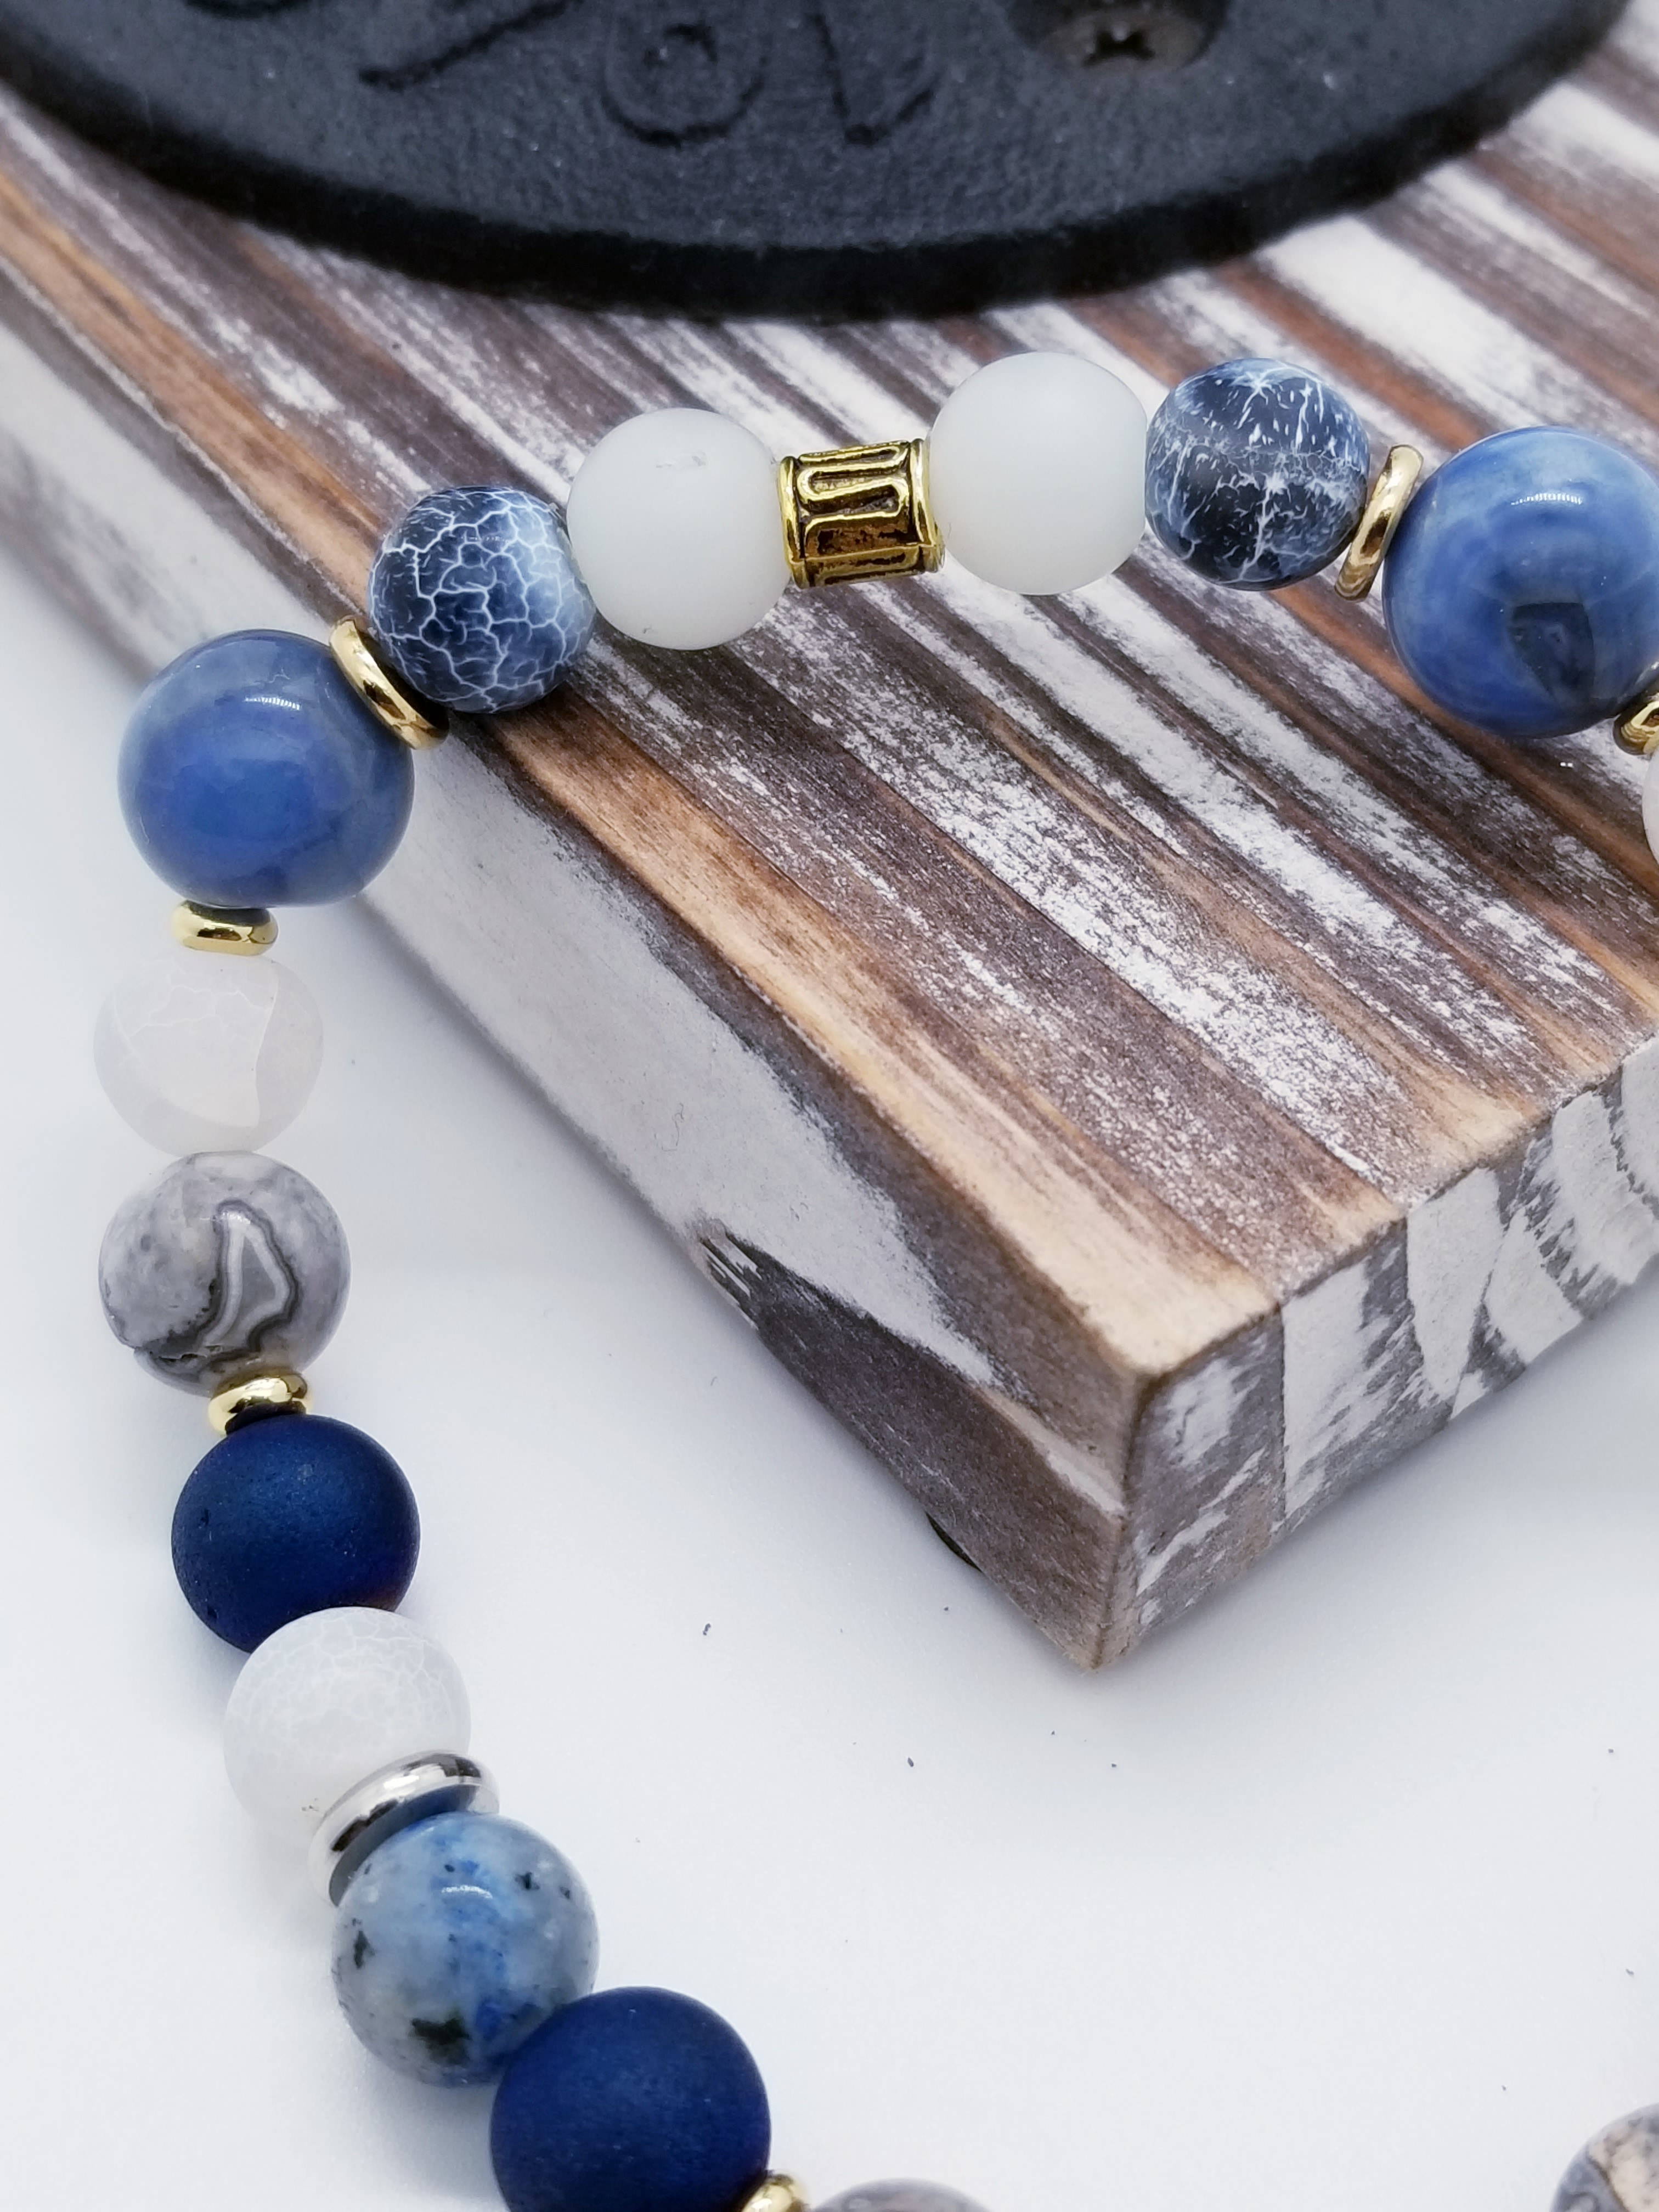 Honor, Respect, and Duty (US Coast Guard core values) inspired bracelet to honor our troops, veterans, and the families that support them! Ship wheel charm with white turquoise beads, grey marbled glass beads, sky blue glass beads, cracked blue and white beads, and gold spacers. 